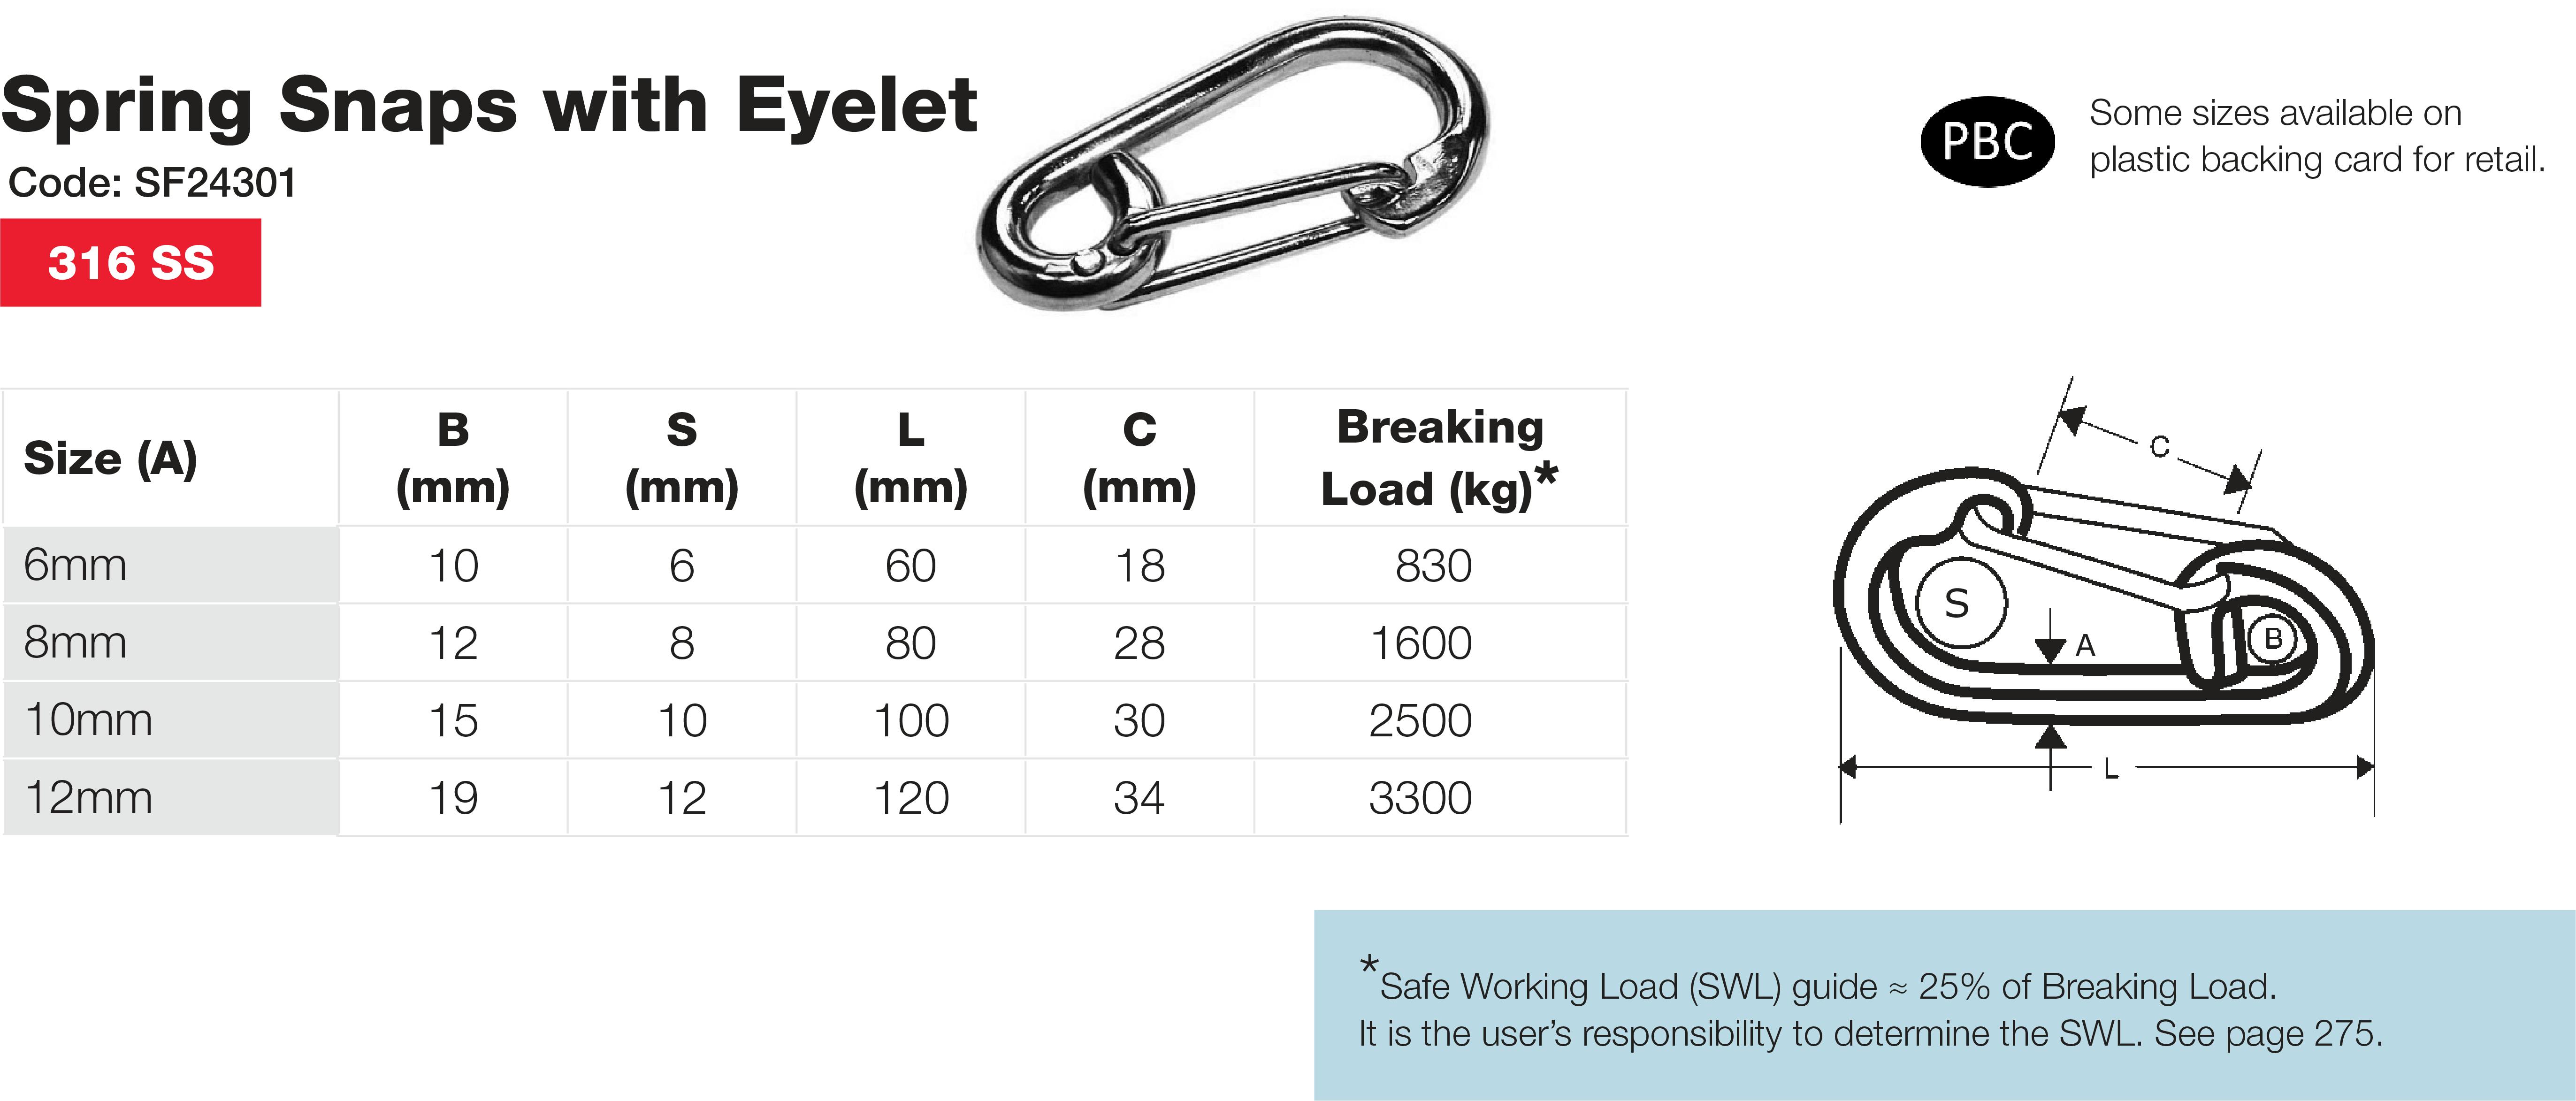 Stainless Marine Spring Snap with Eyelet Performance Data